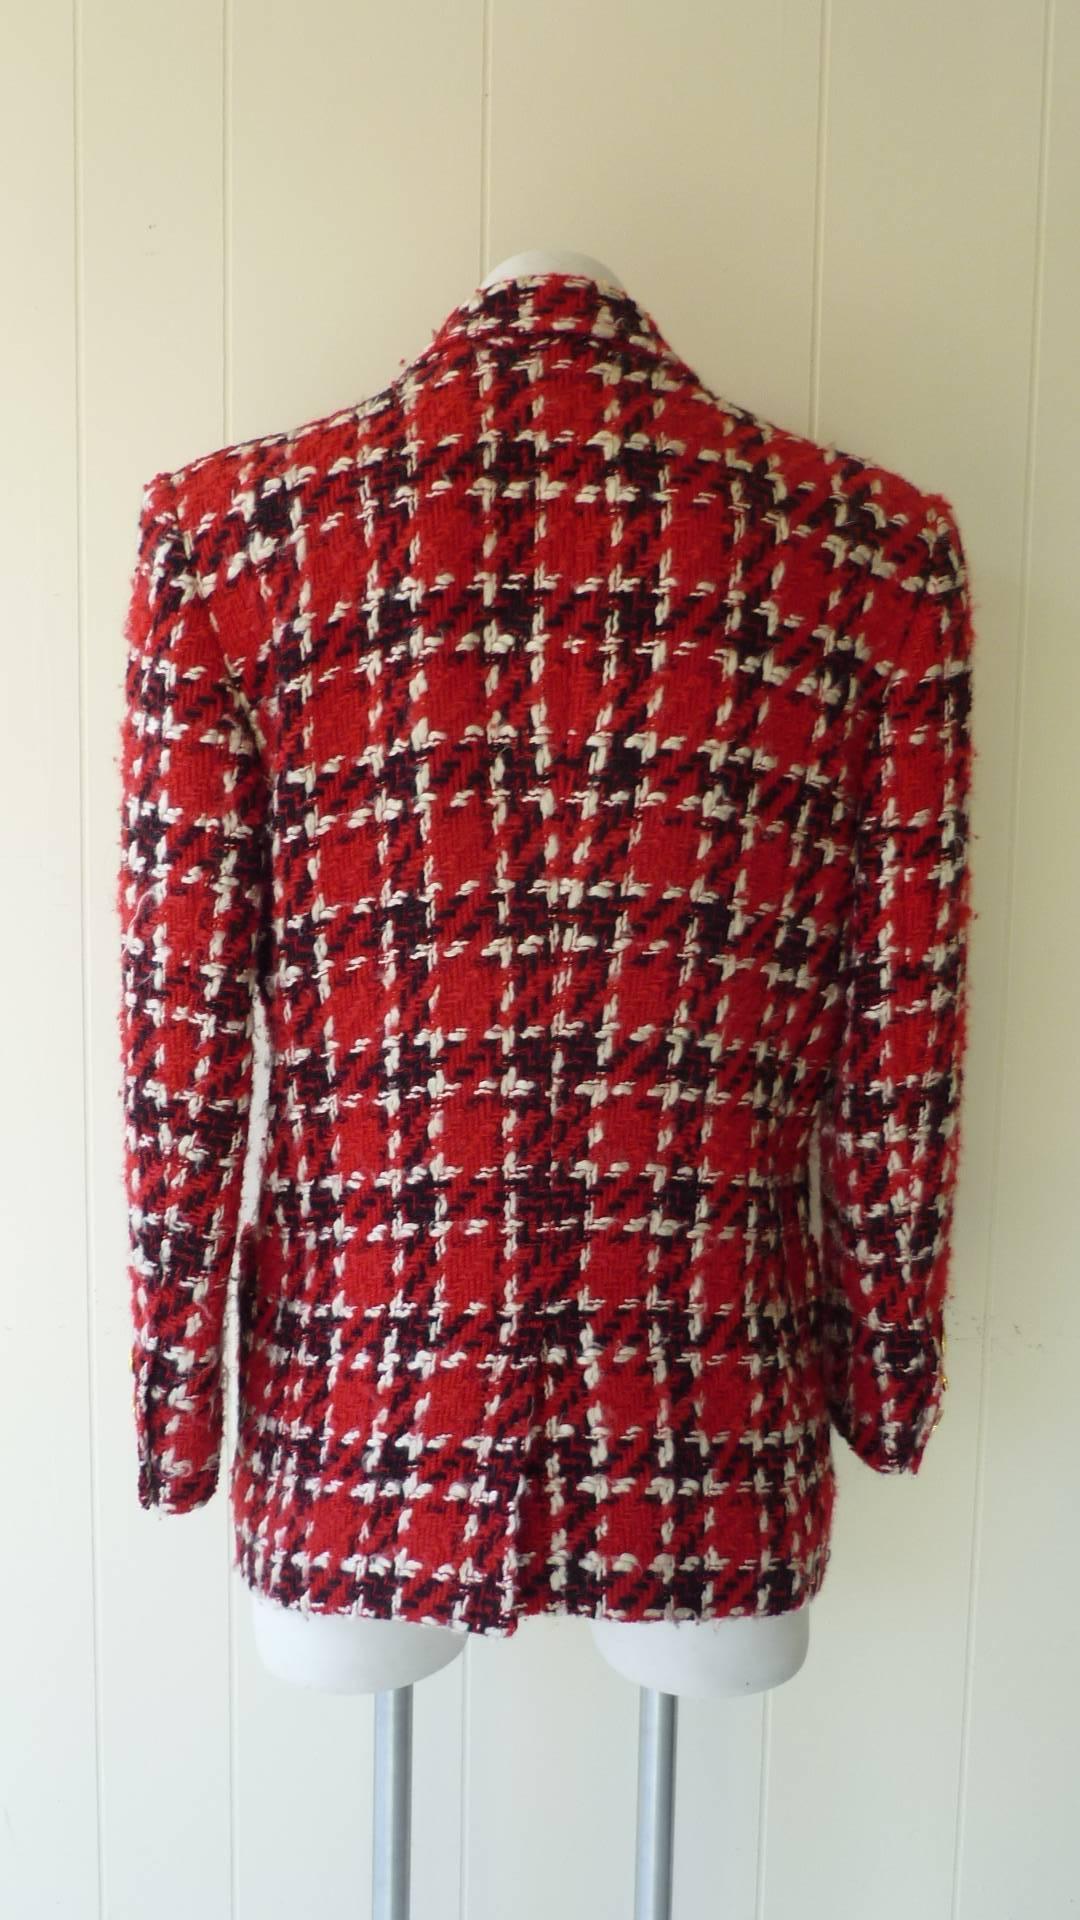 This is a traditional 1980s tweed jacket with a red, white and black weave. There are four front pockets, two with Rue Cambon buttons; a vent to the back; three Rue Cambon buttons on each sleeve, and a lapel collar.